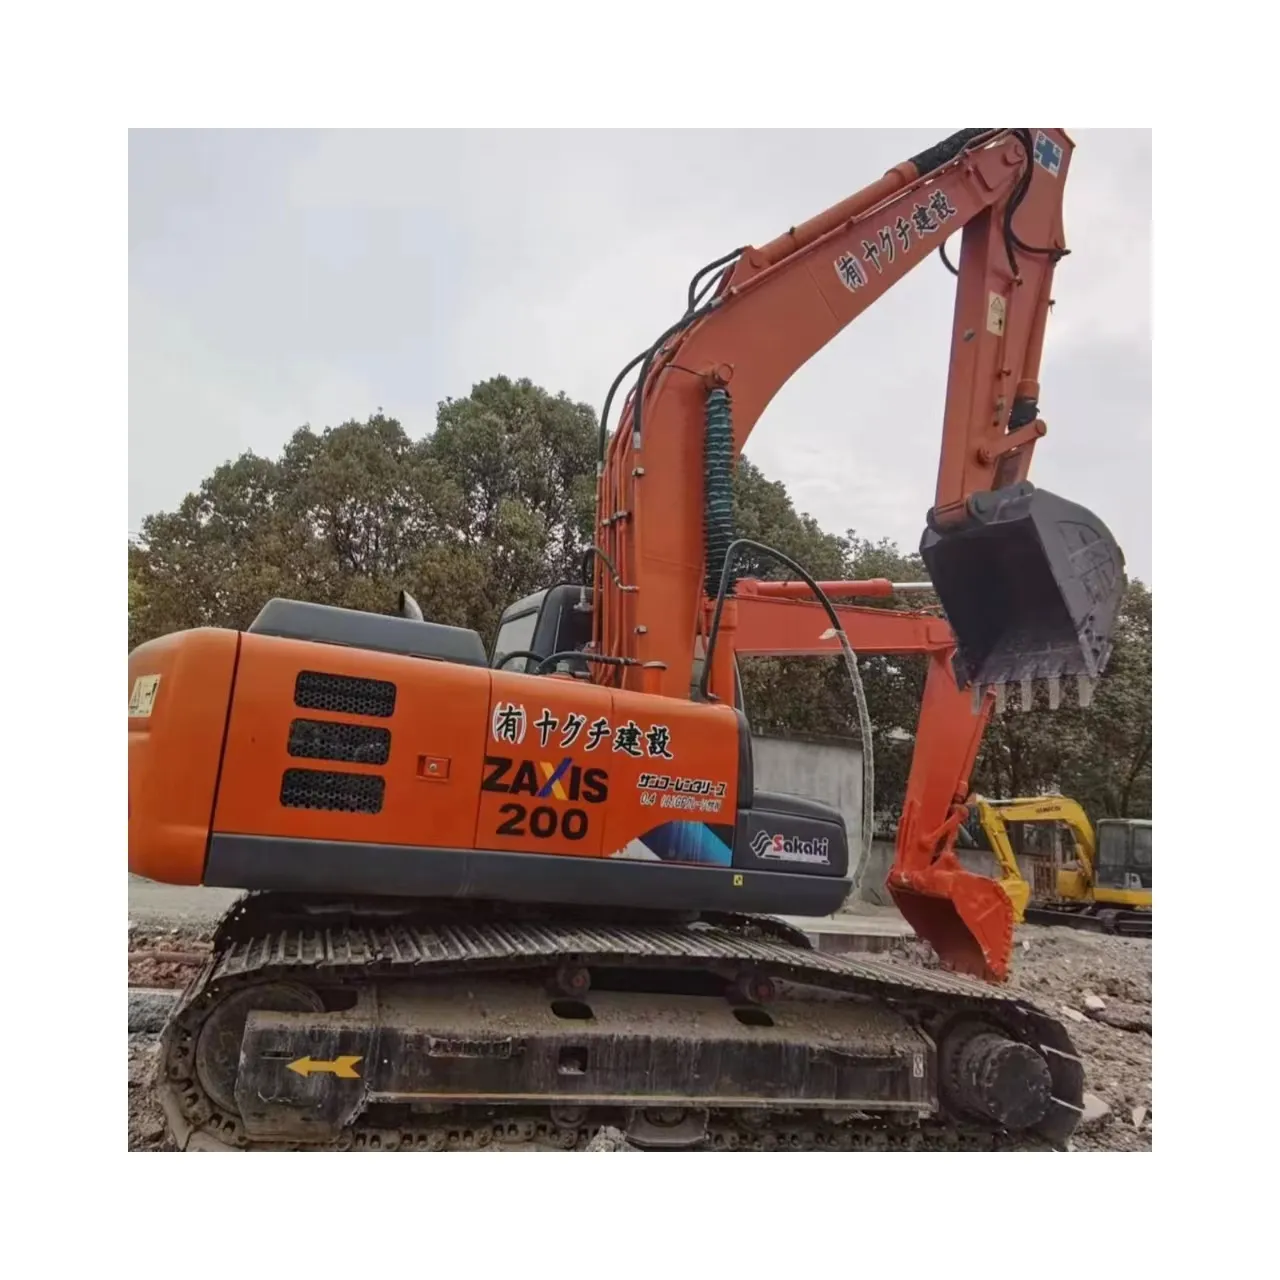 ZIHUI Low Freight Second Hand Crawler Excavator Hitachi ZX200-6A In Low Hours Hitachi ZX200 Used Excavator